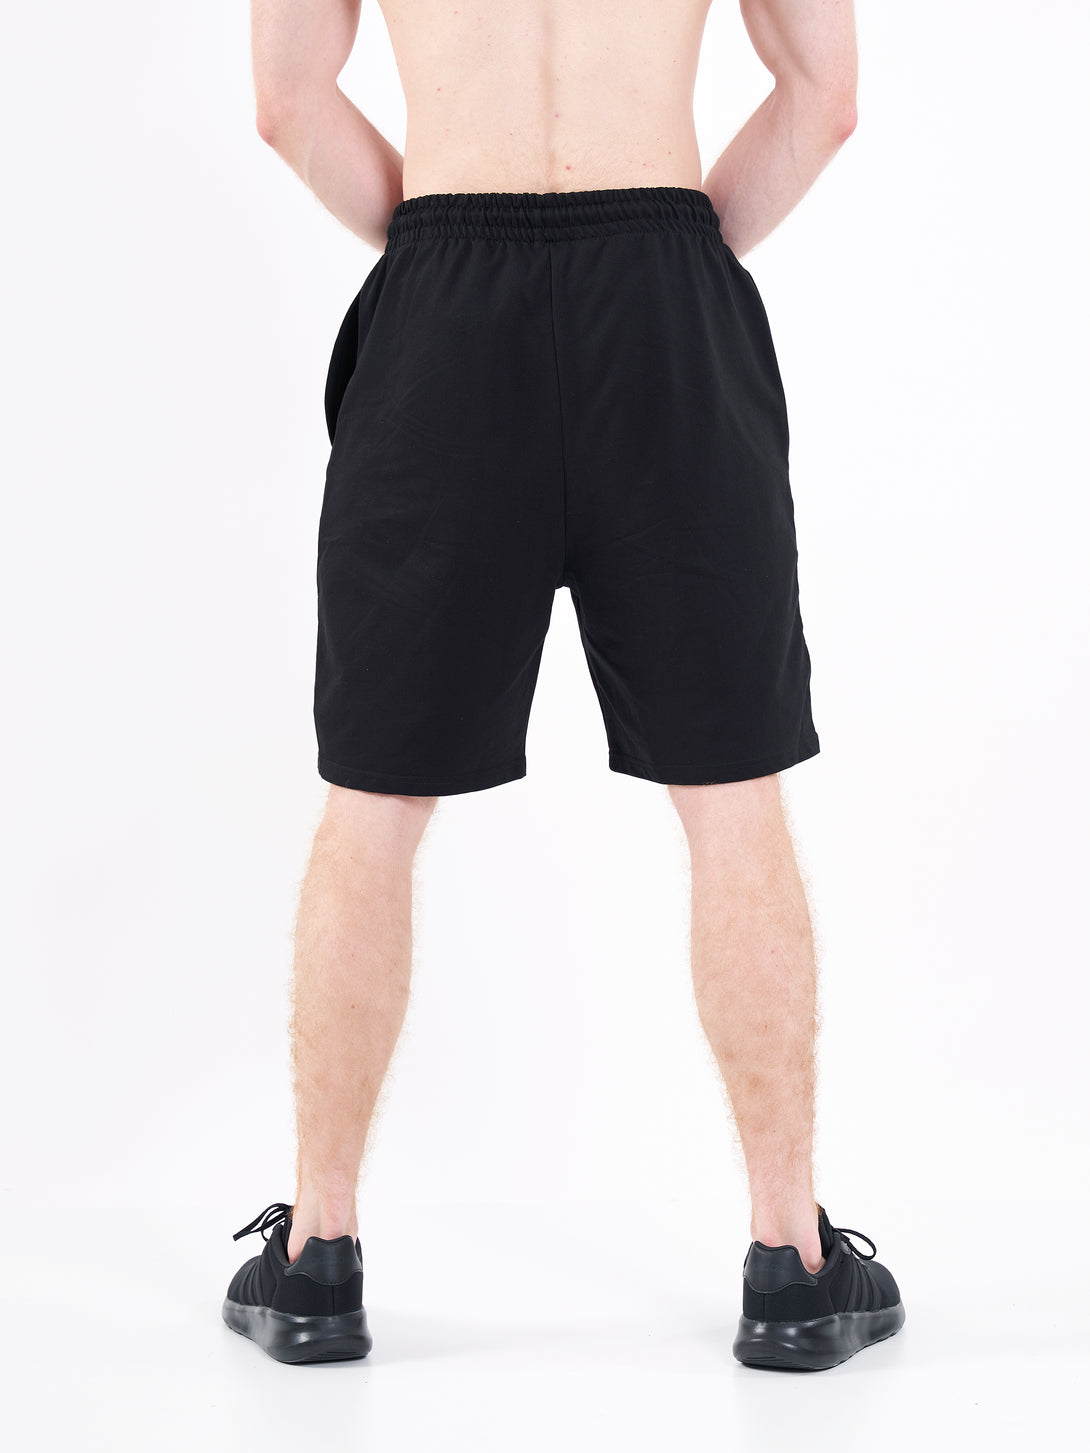 A Man Wearing Deep Black Color Men's Easy-Fit Shorts for All-Day Wear